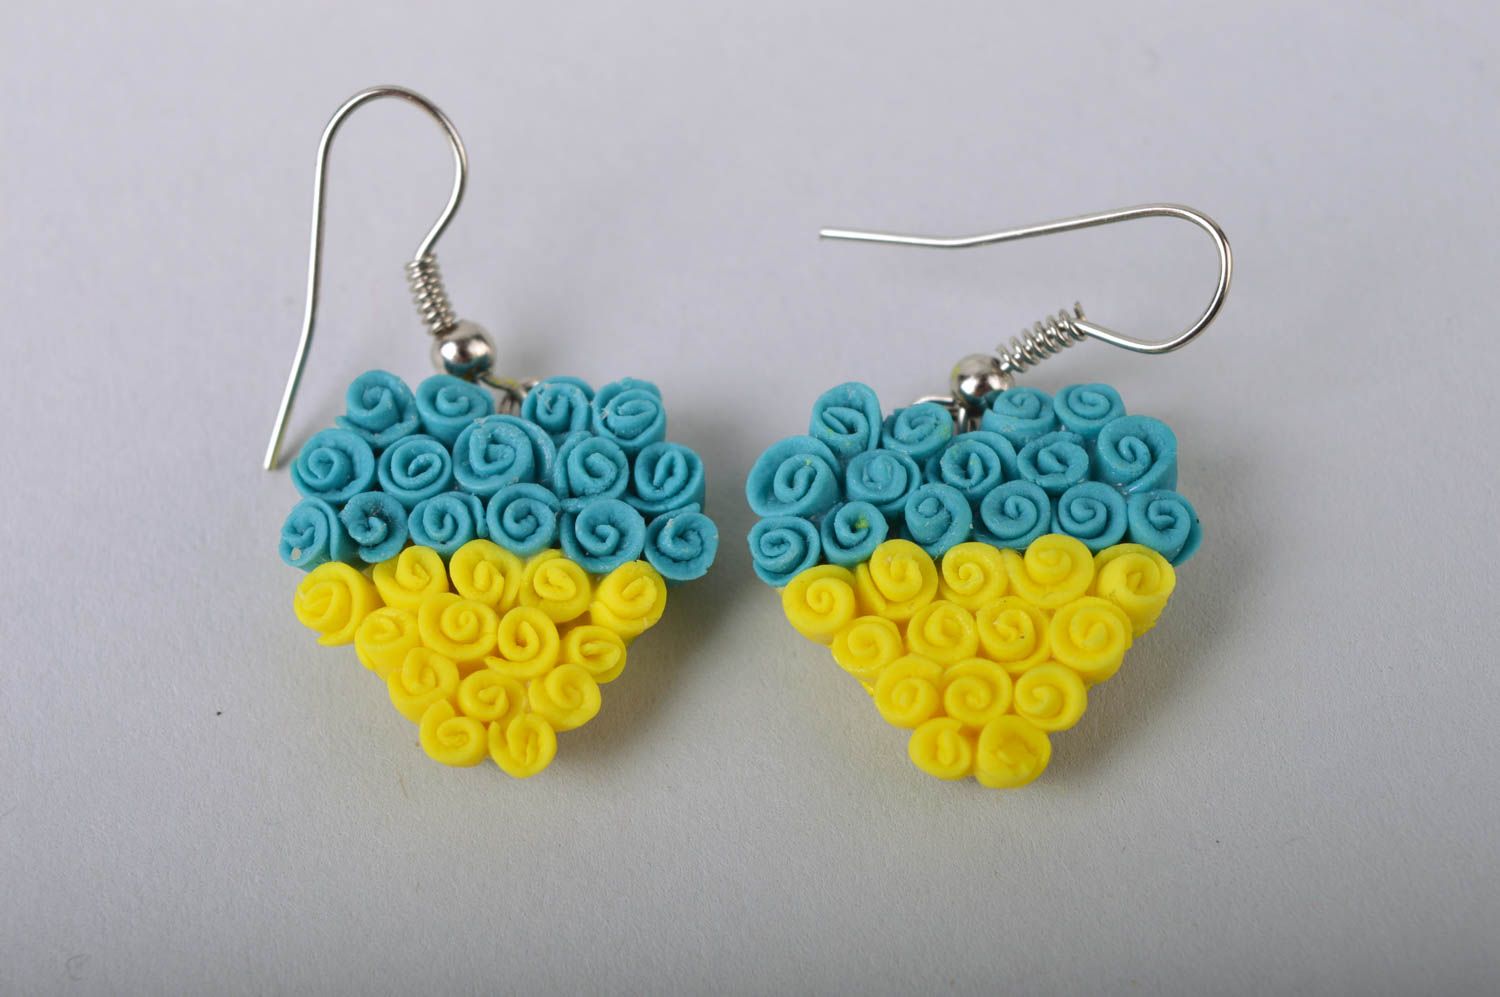 Handmade unusual bright earrings made of cold porcelain in shape of heart photo 2